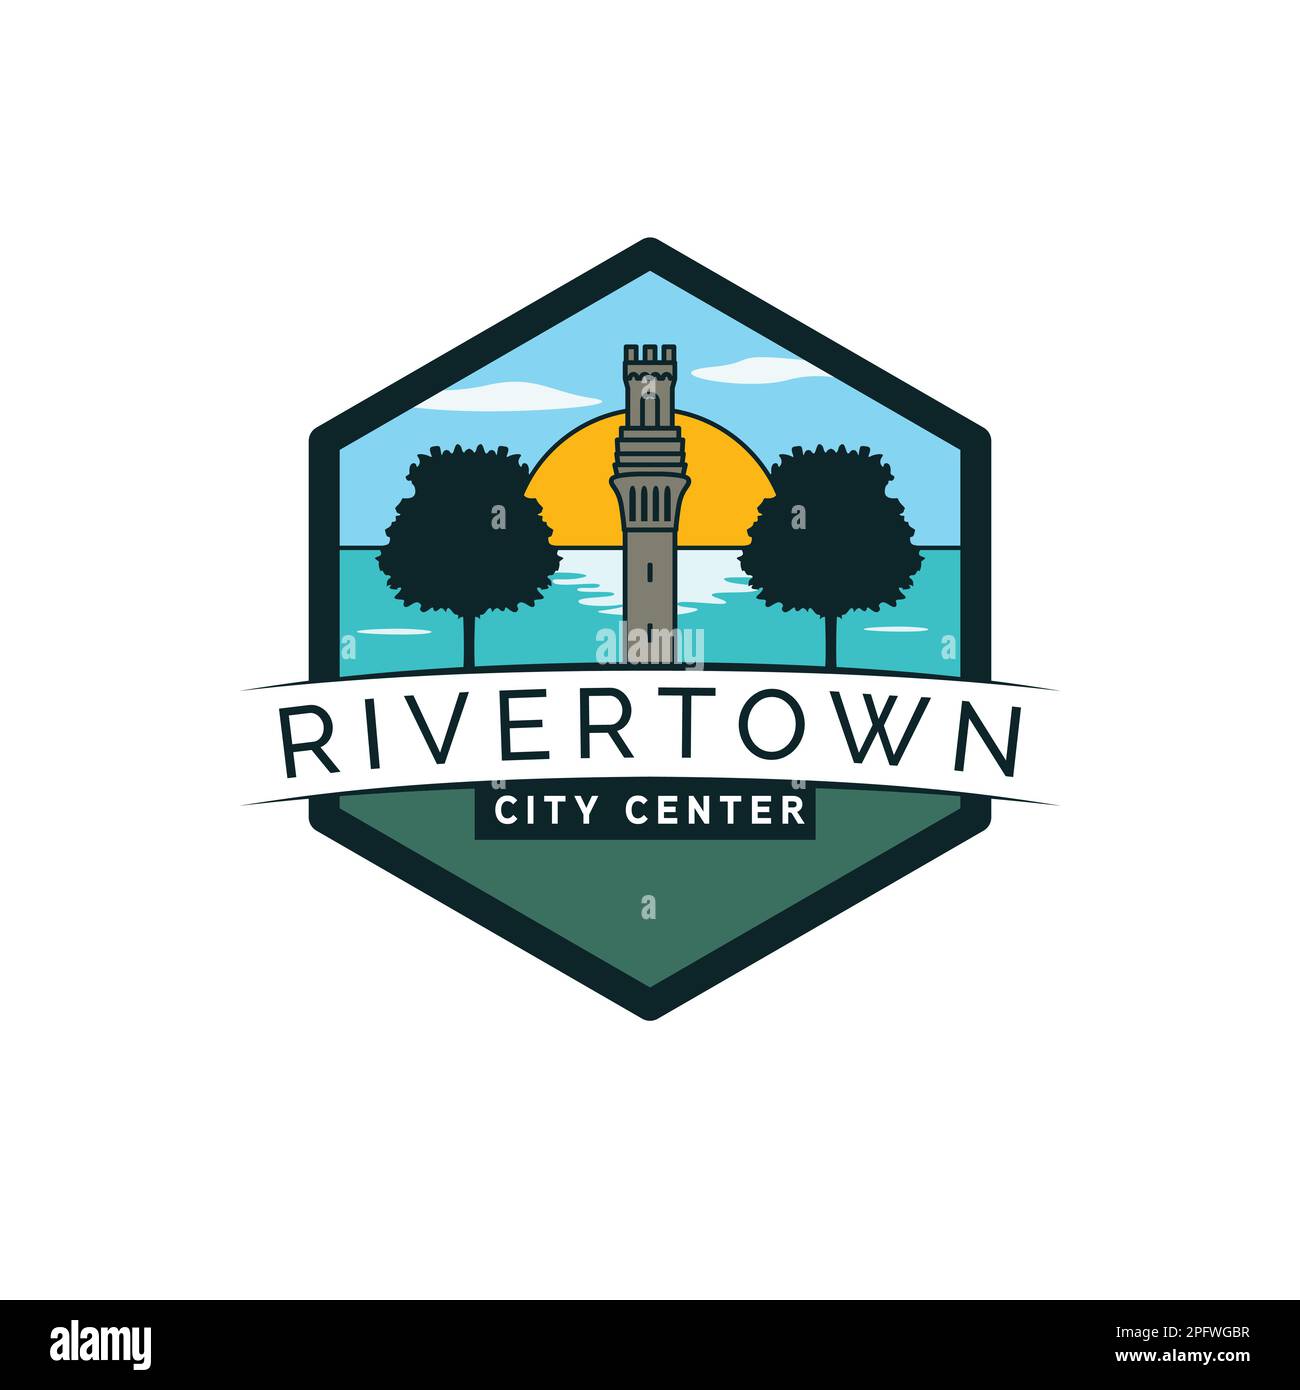 Rivertown city center logo design. Landscape and  tower modern logotype. Lake and city logo template. Stock Vector